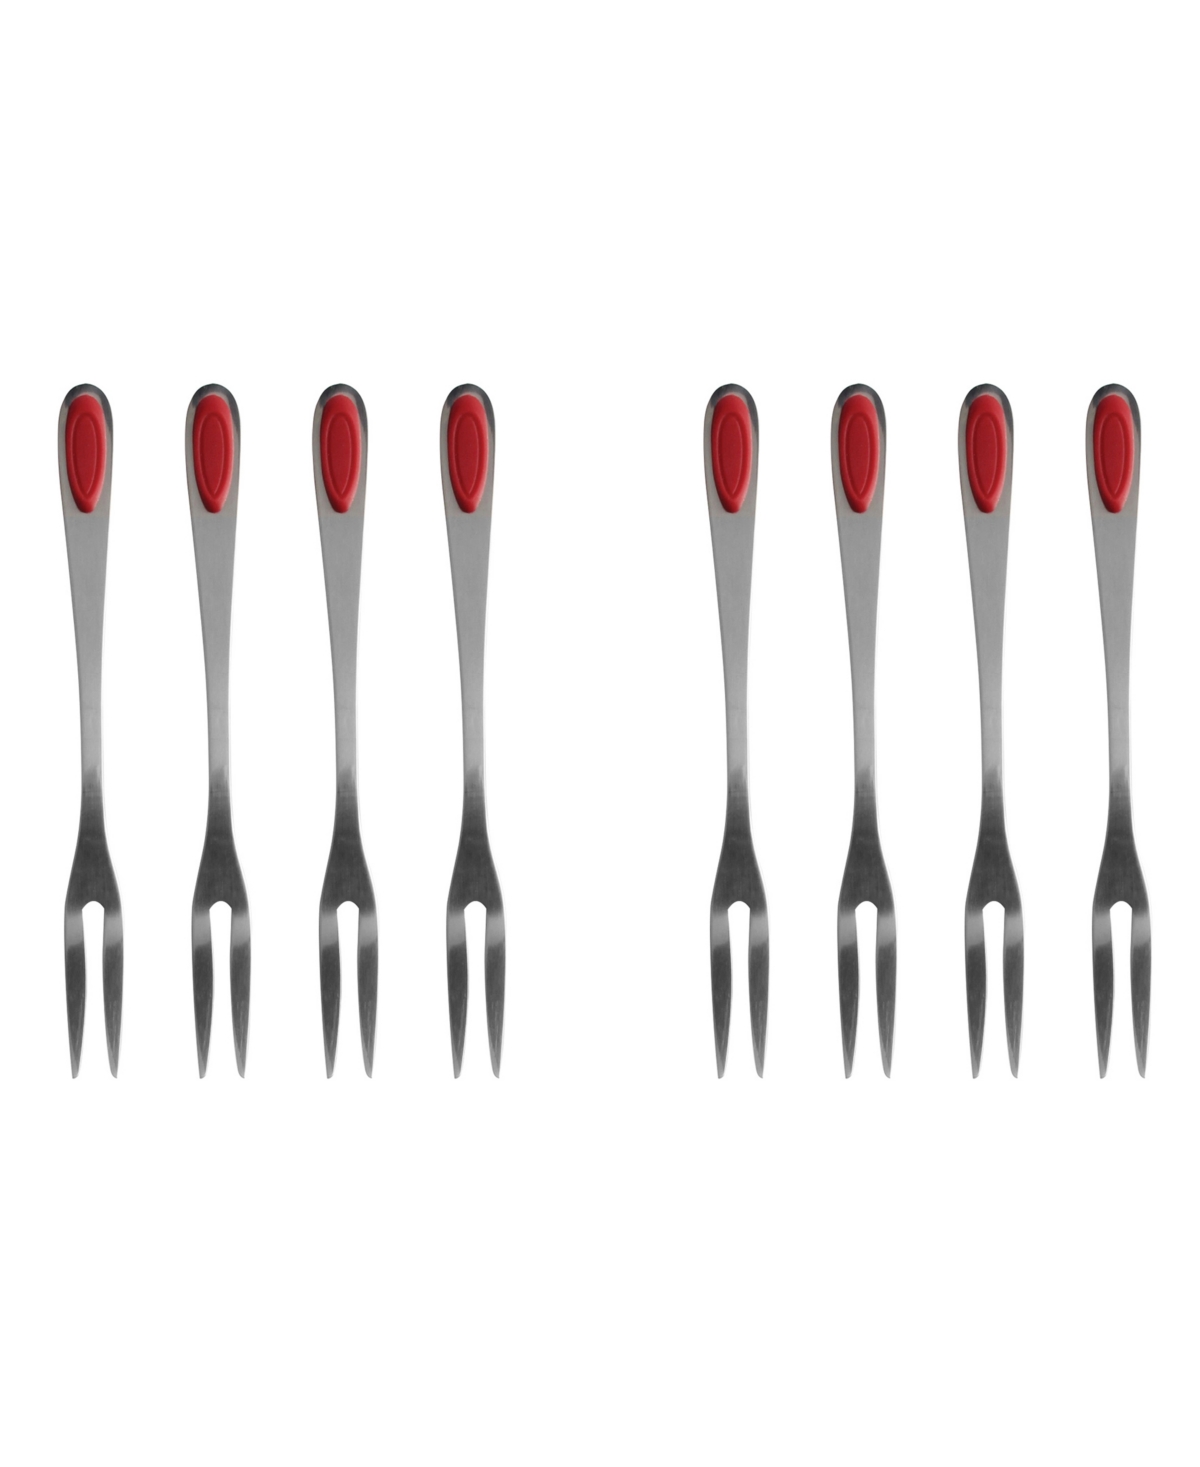 Maine Man Seafood Set Of 8 Stainless Steel And Silicone Forks In Red